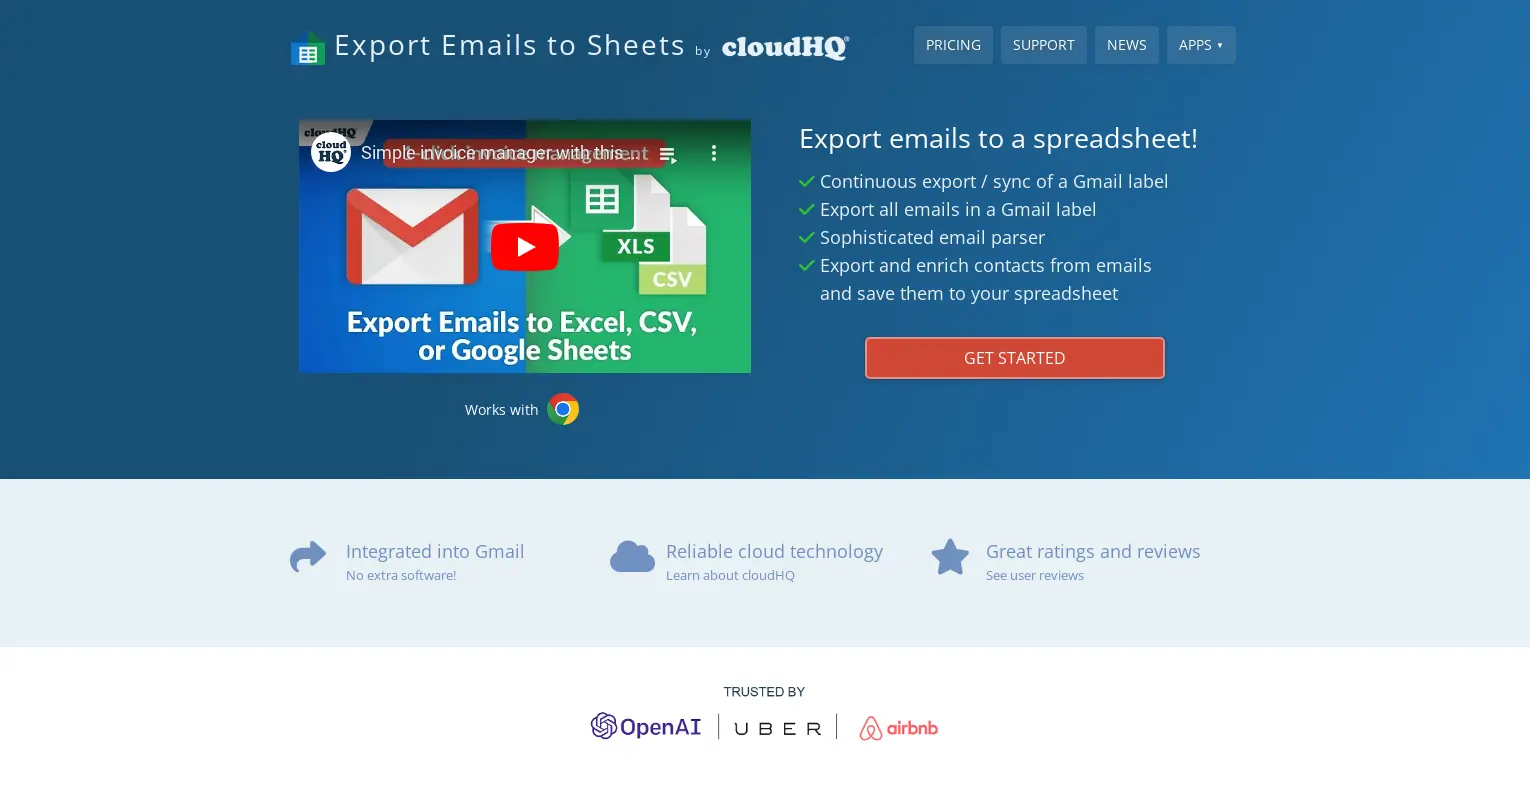 Export Emails to Sheets by cloudHQ